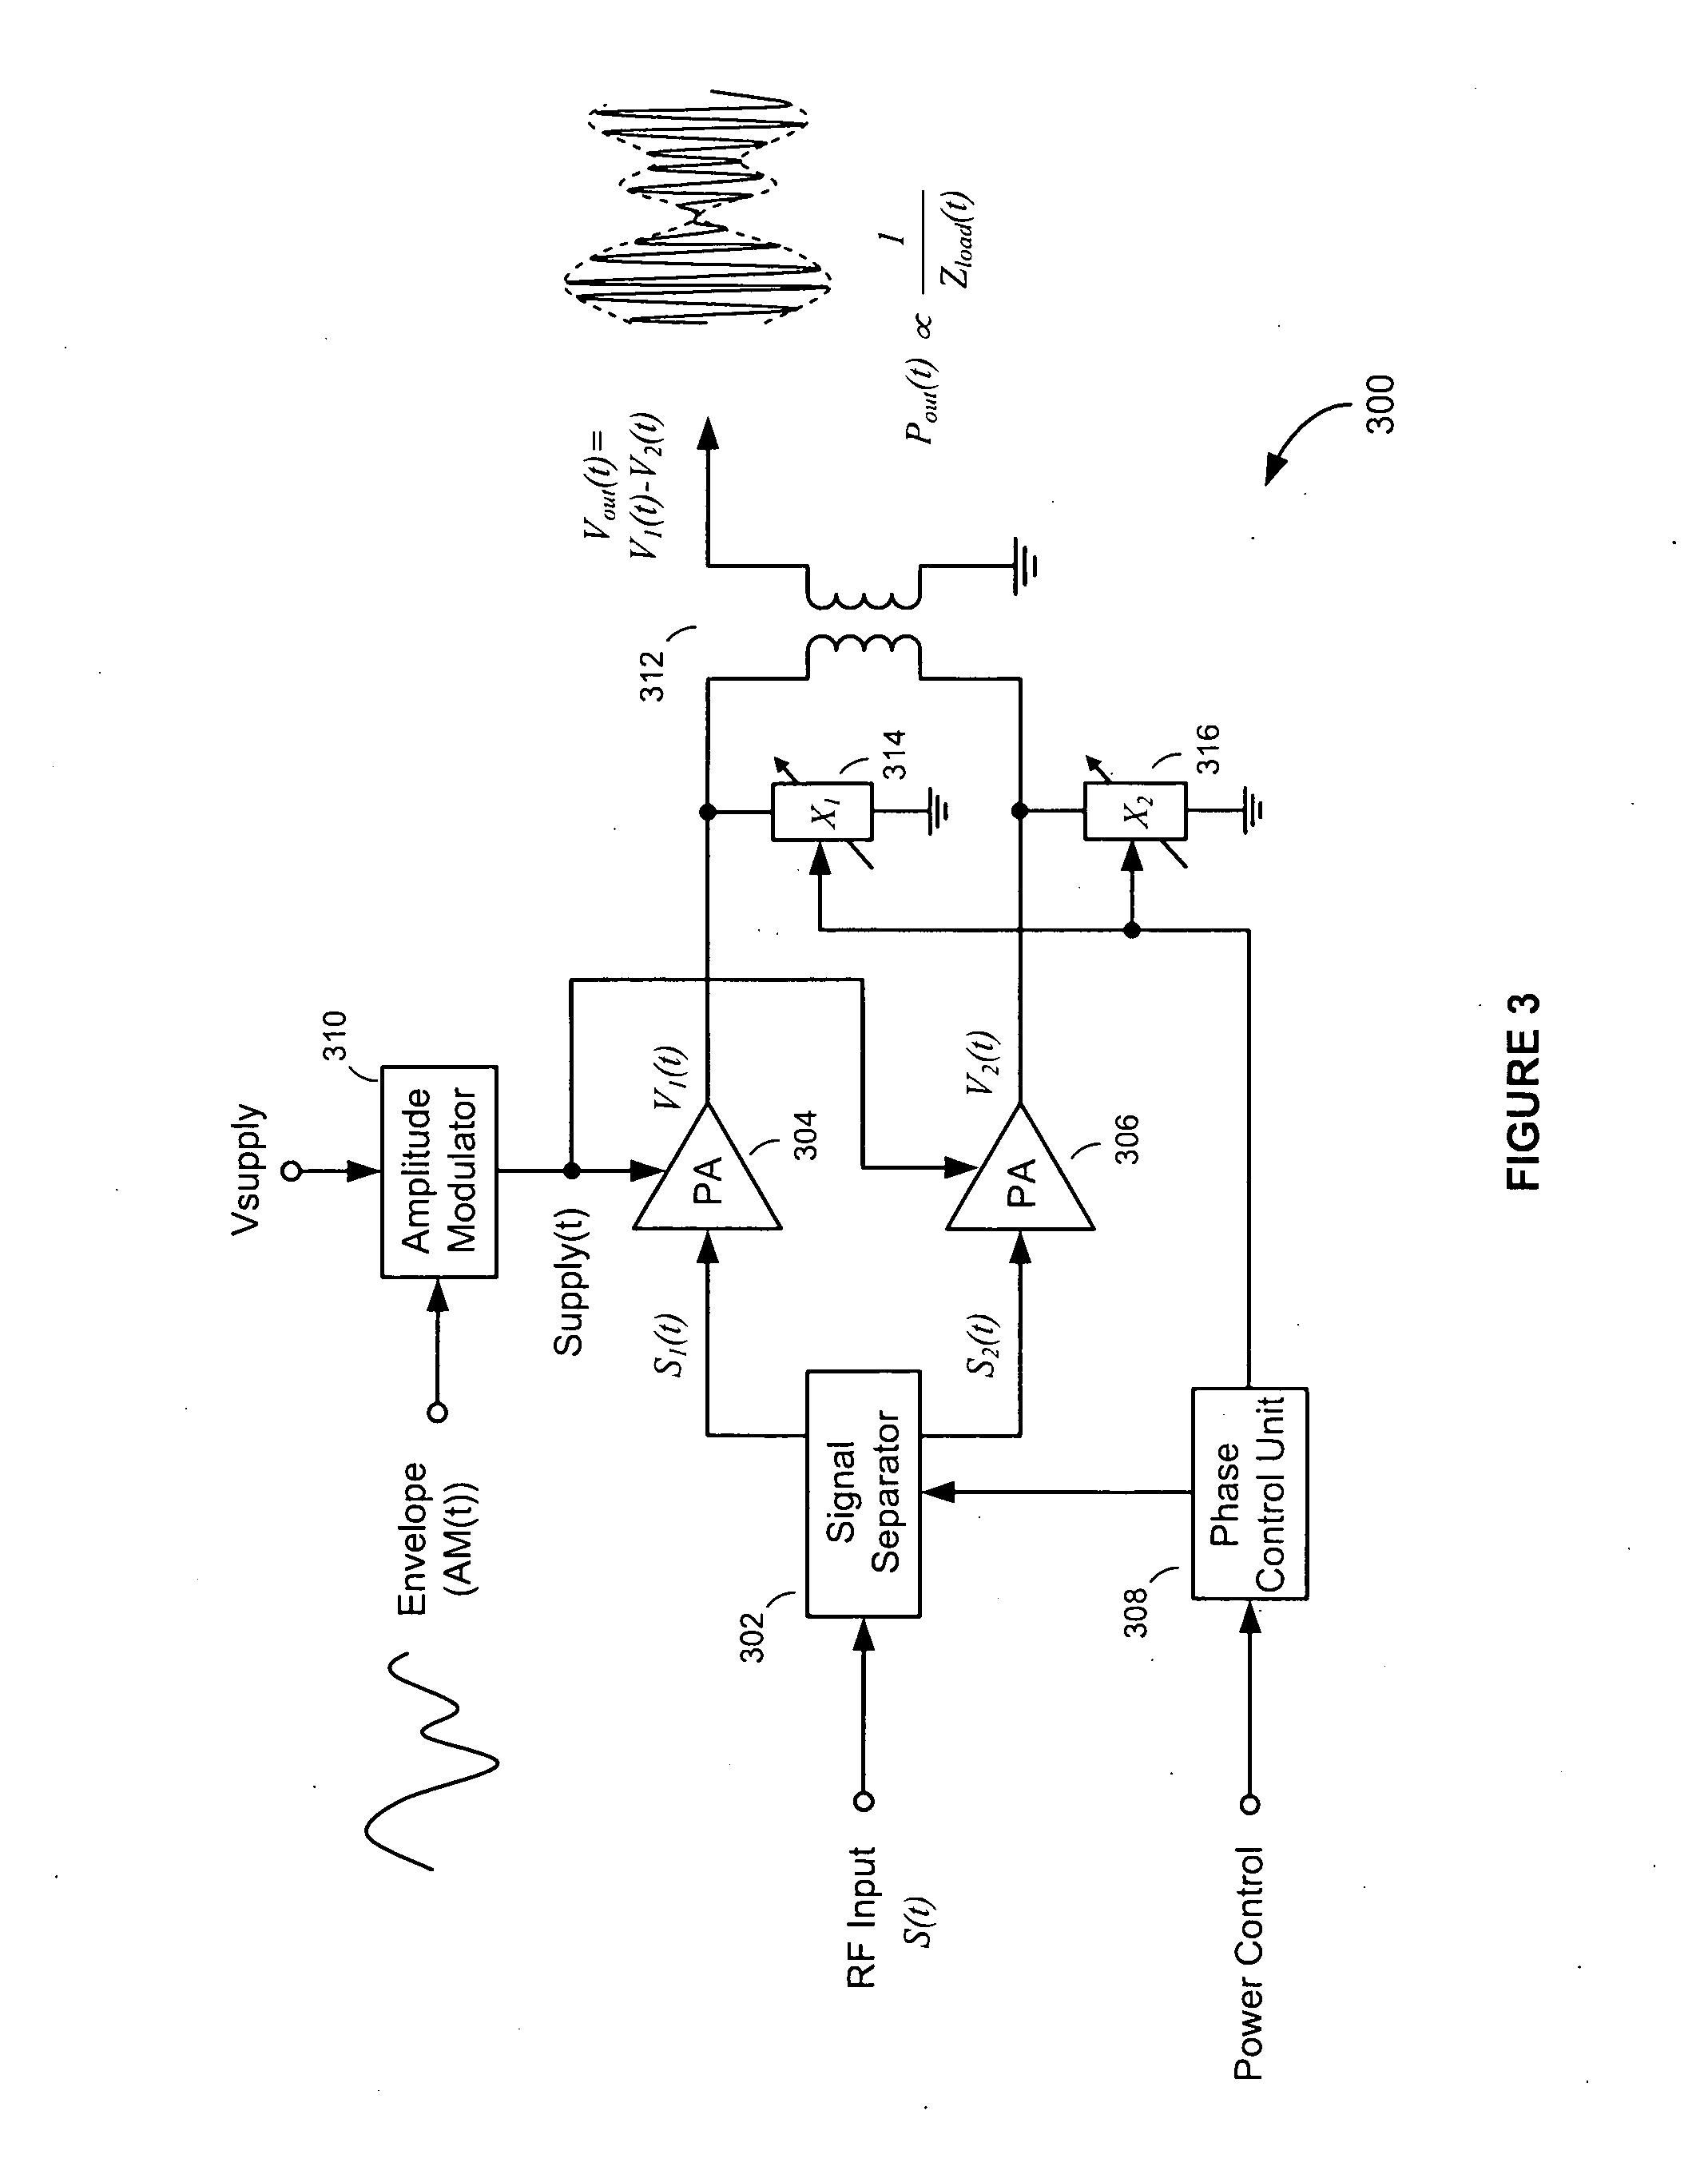 High-efficiency transmitter with load impedance control